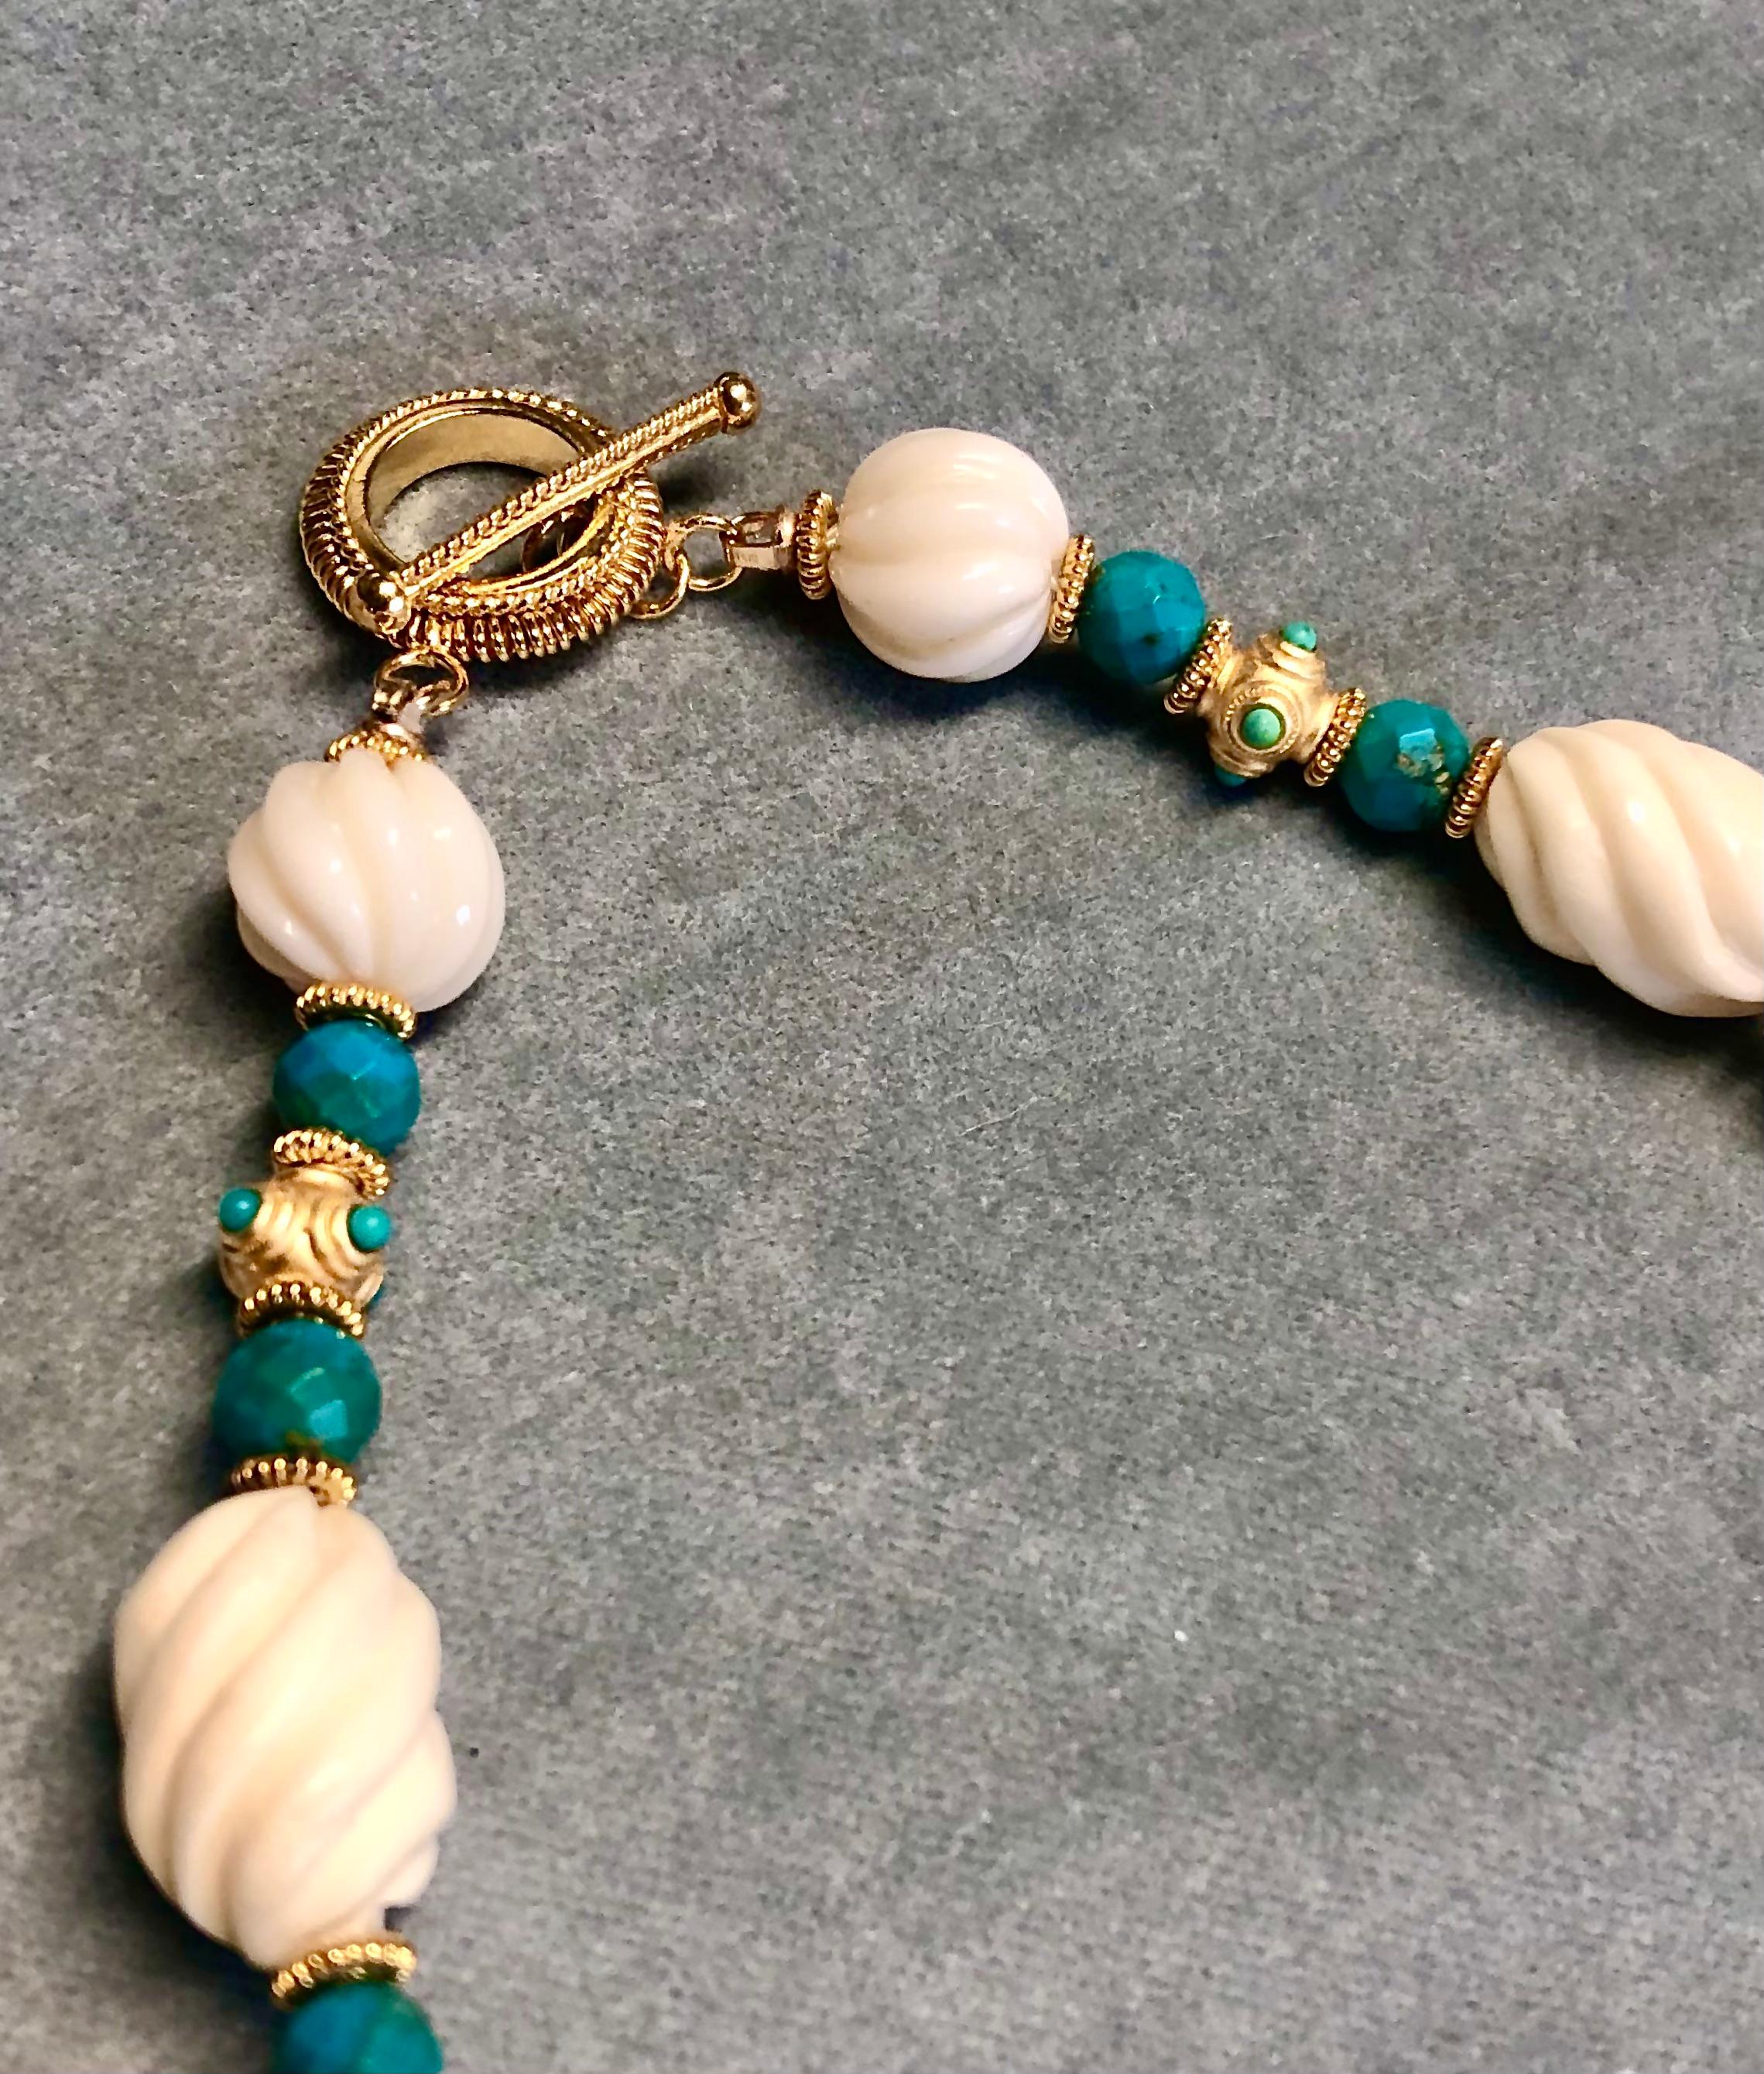 19th Century Mughal style necklace w/ vintage bone bead, gold vermeil, turquoise For Sale 1